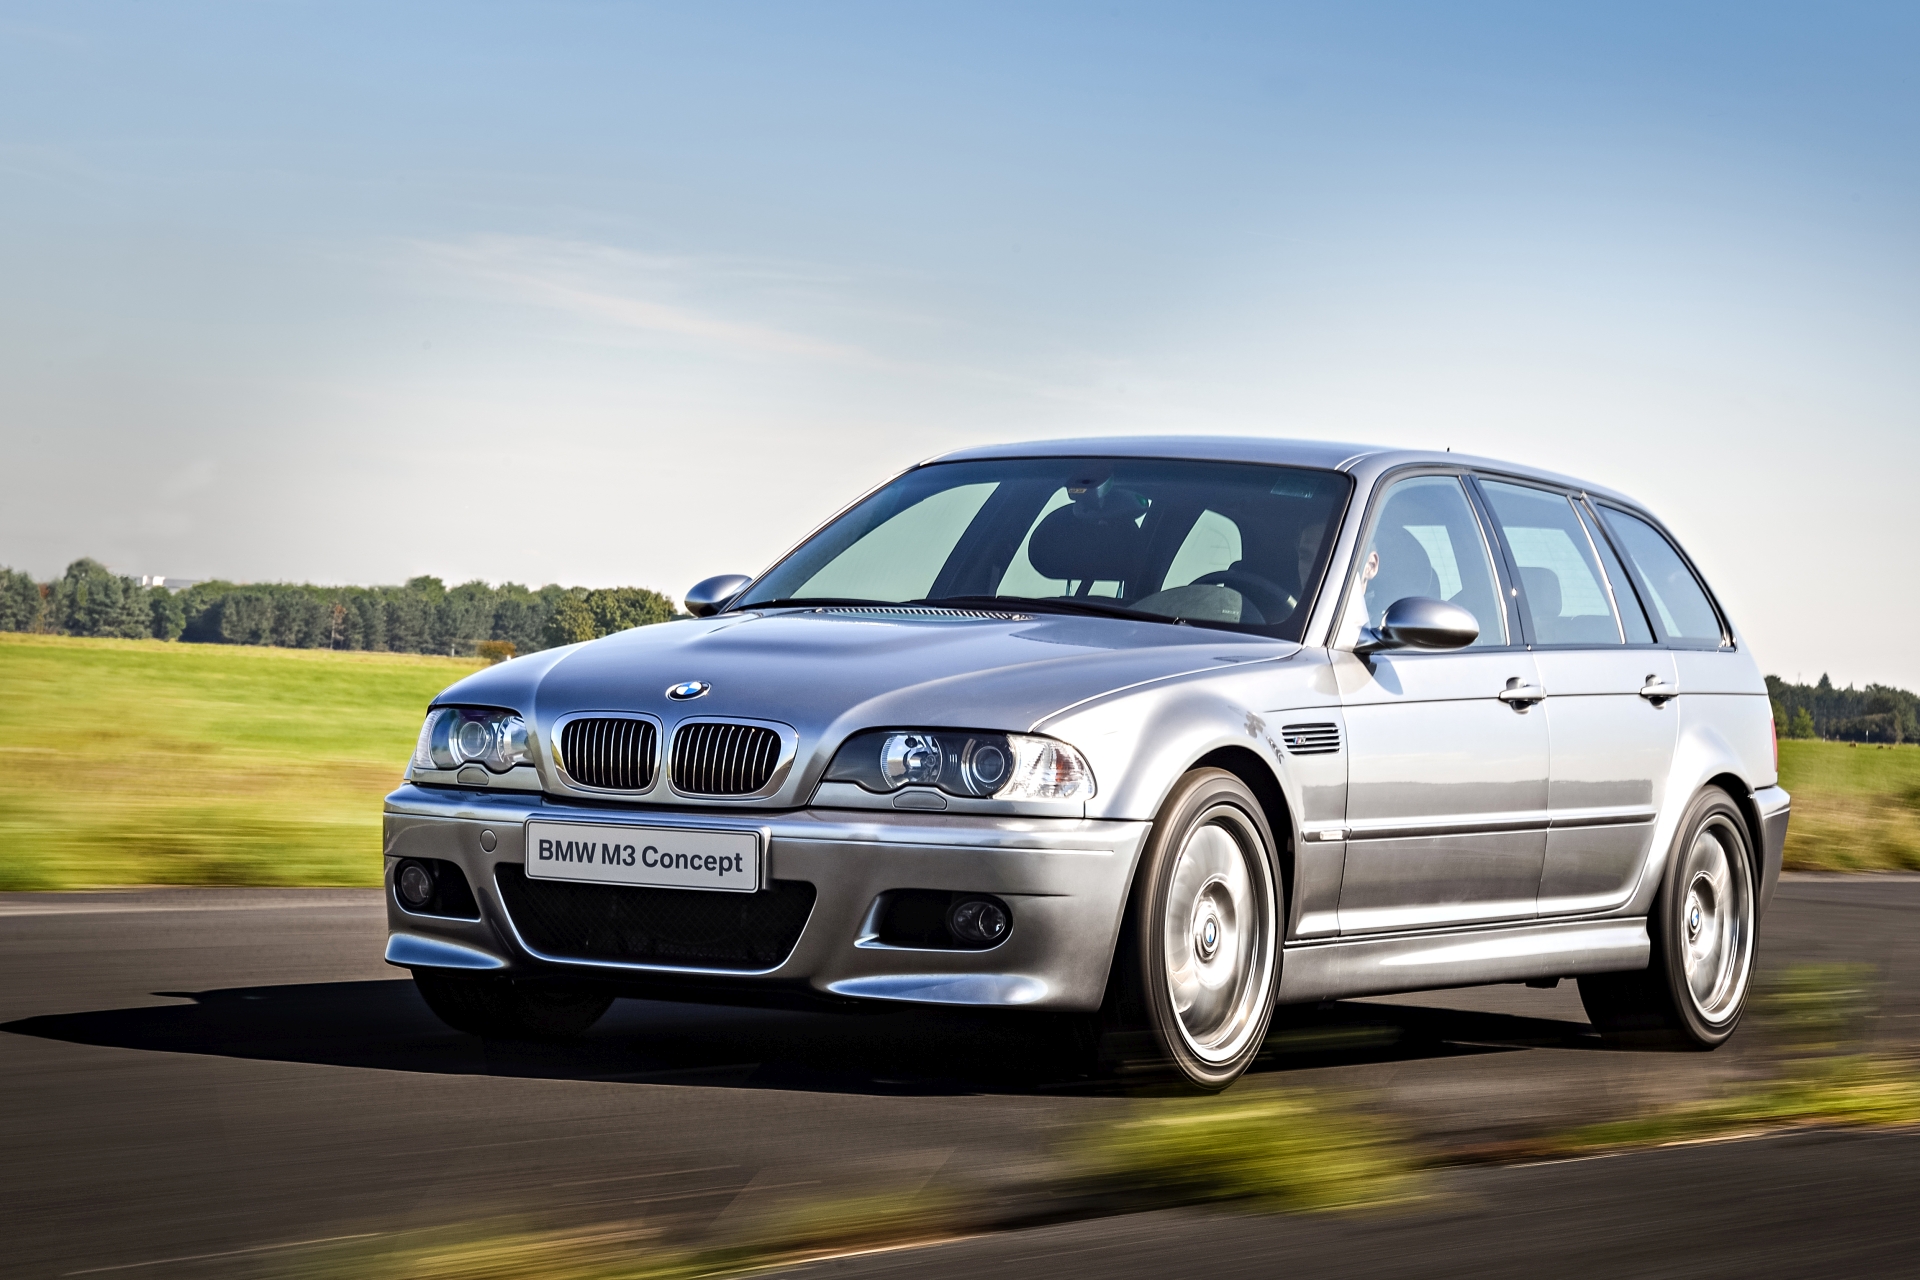 The OneOff BMW E46 M3 Touring